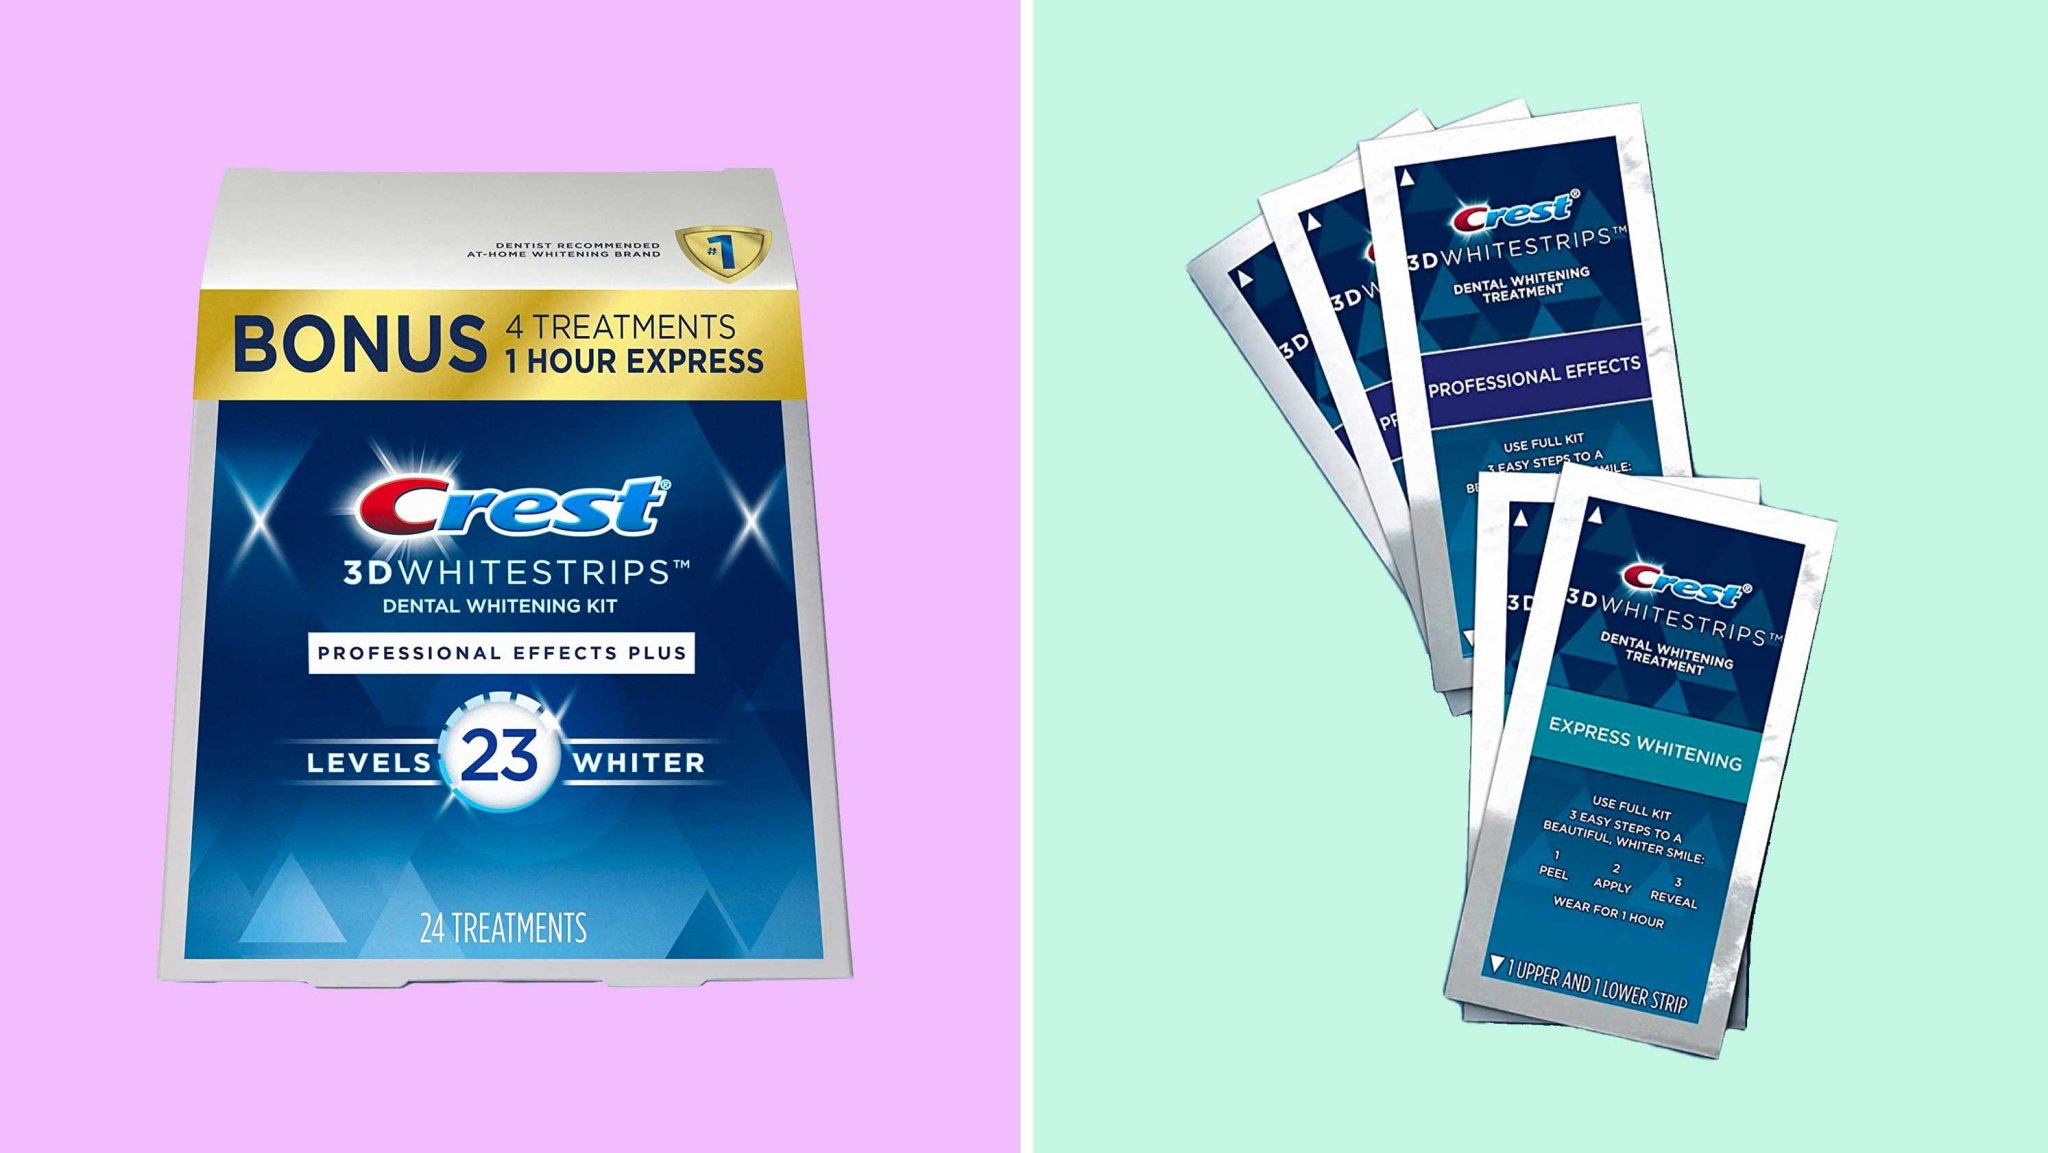 Crest 3D Whitestrips are less than $35 at Amazon this week